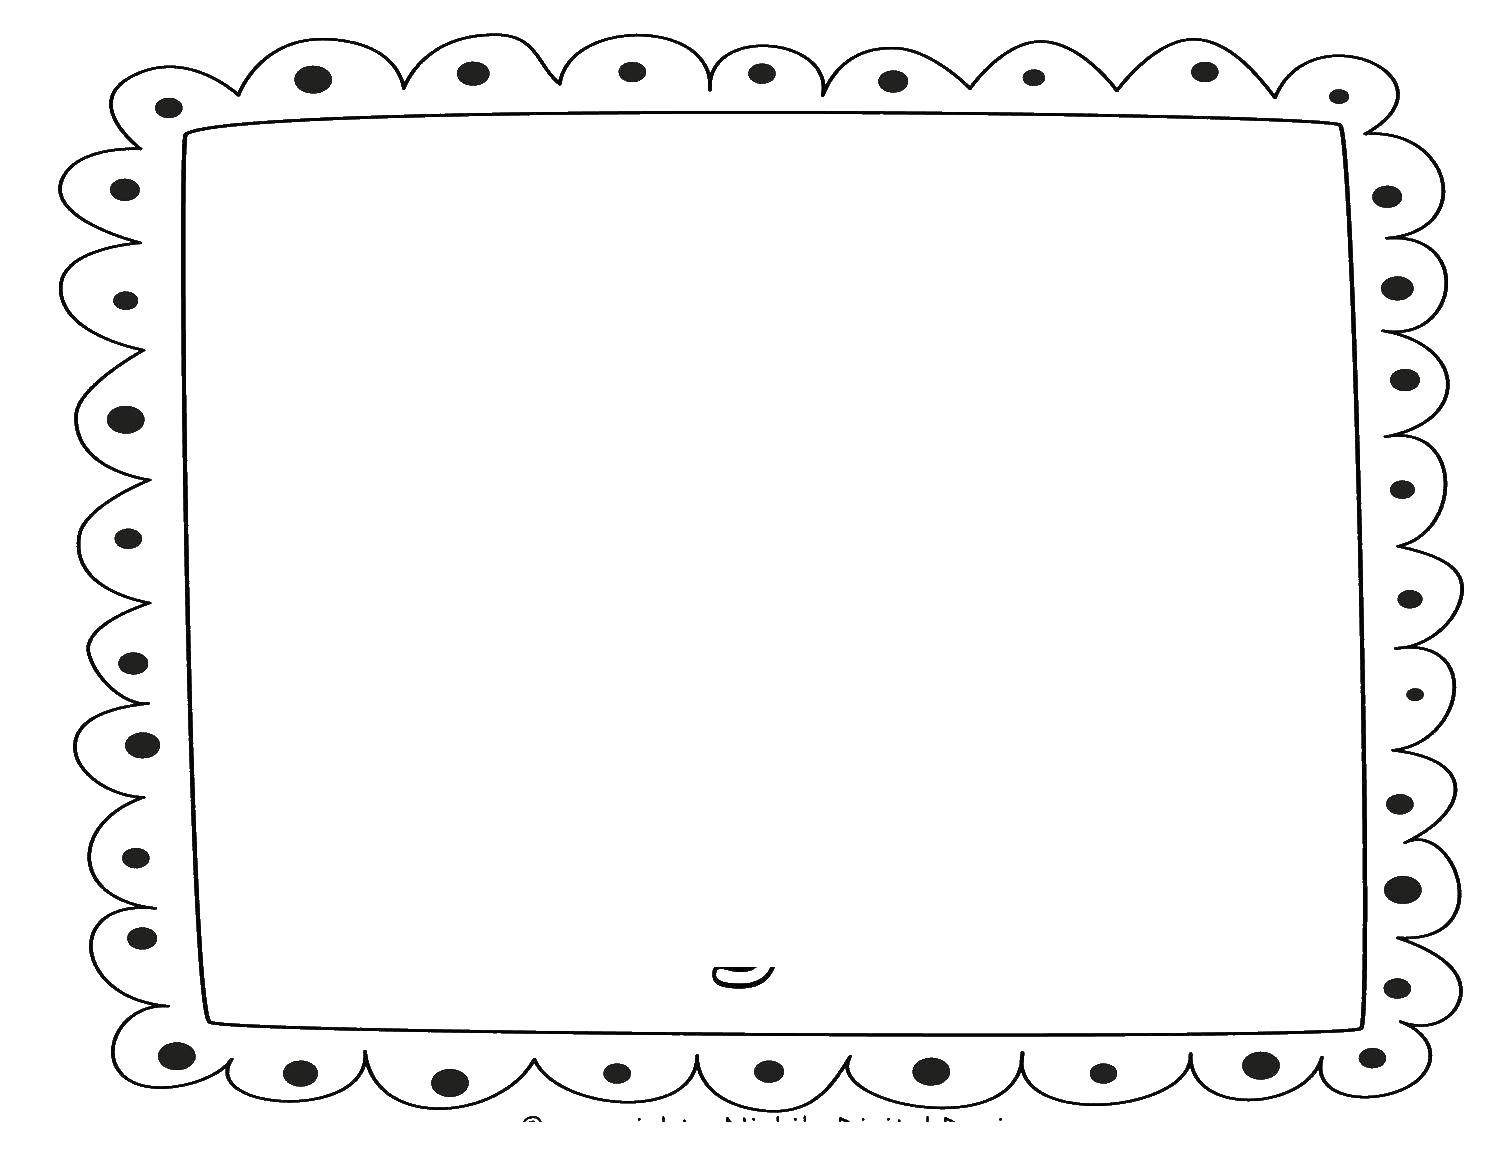 Coloring Frame for text. Category frames. Tags:  frame, text.